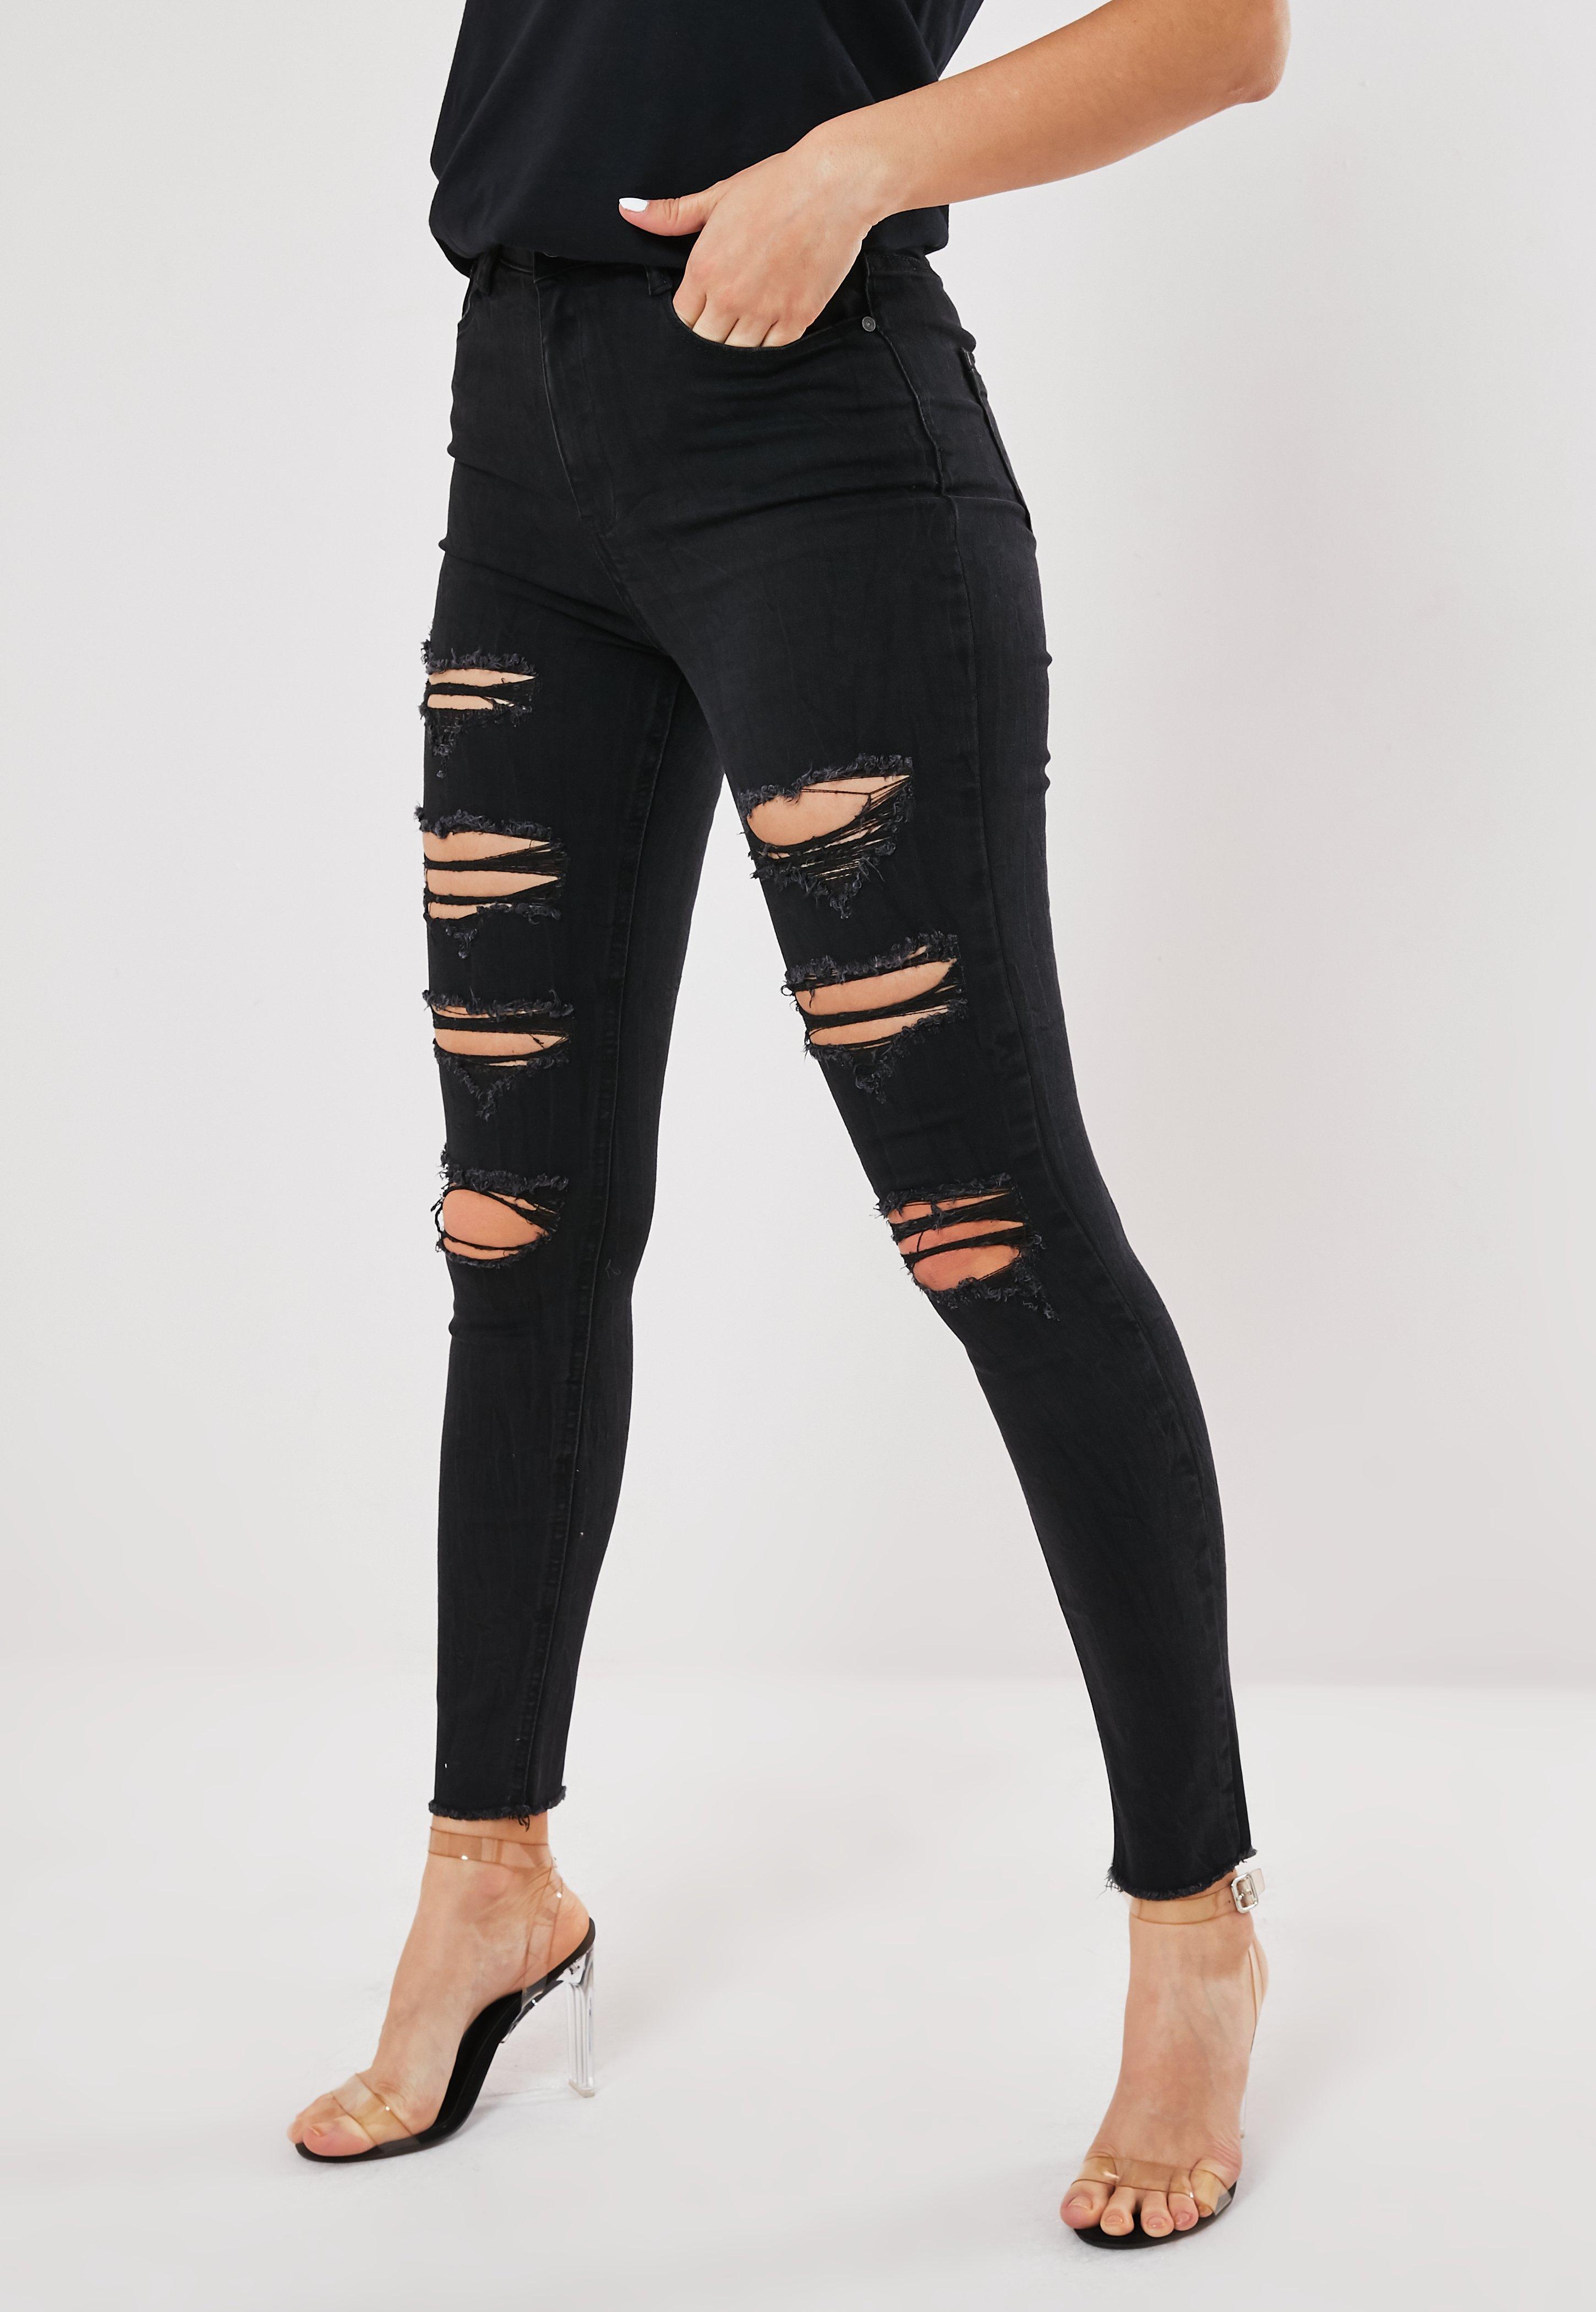 Missguided Denim High Waisted Extreme Ripped Skinny Jeans in Black